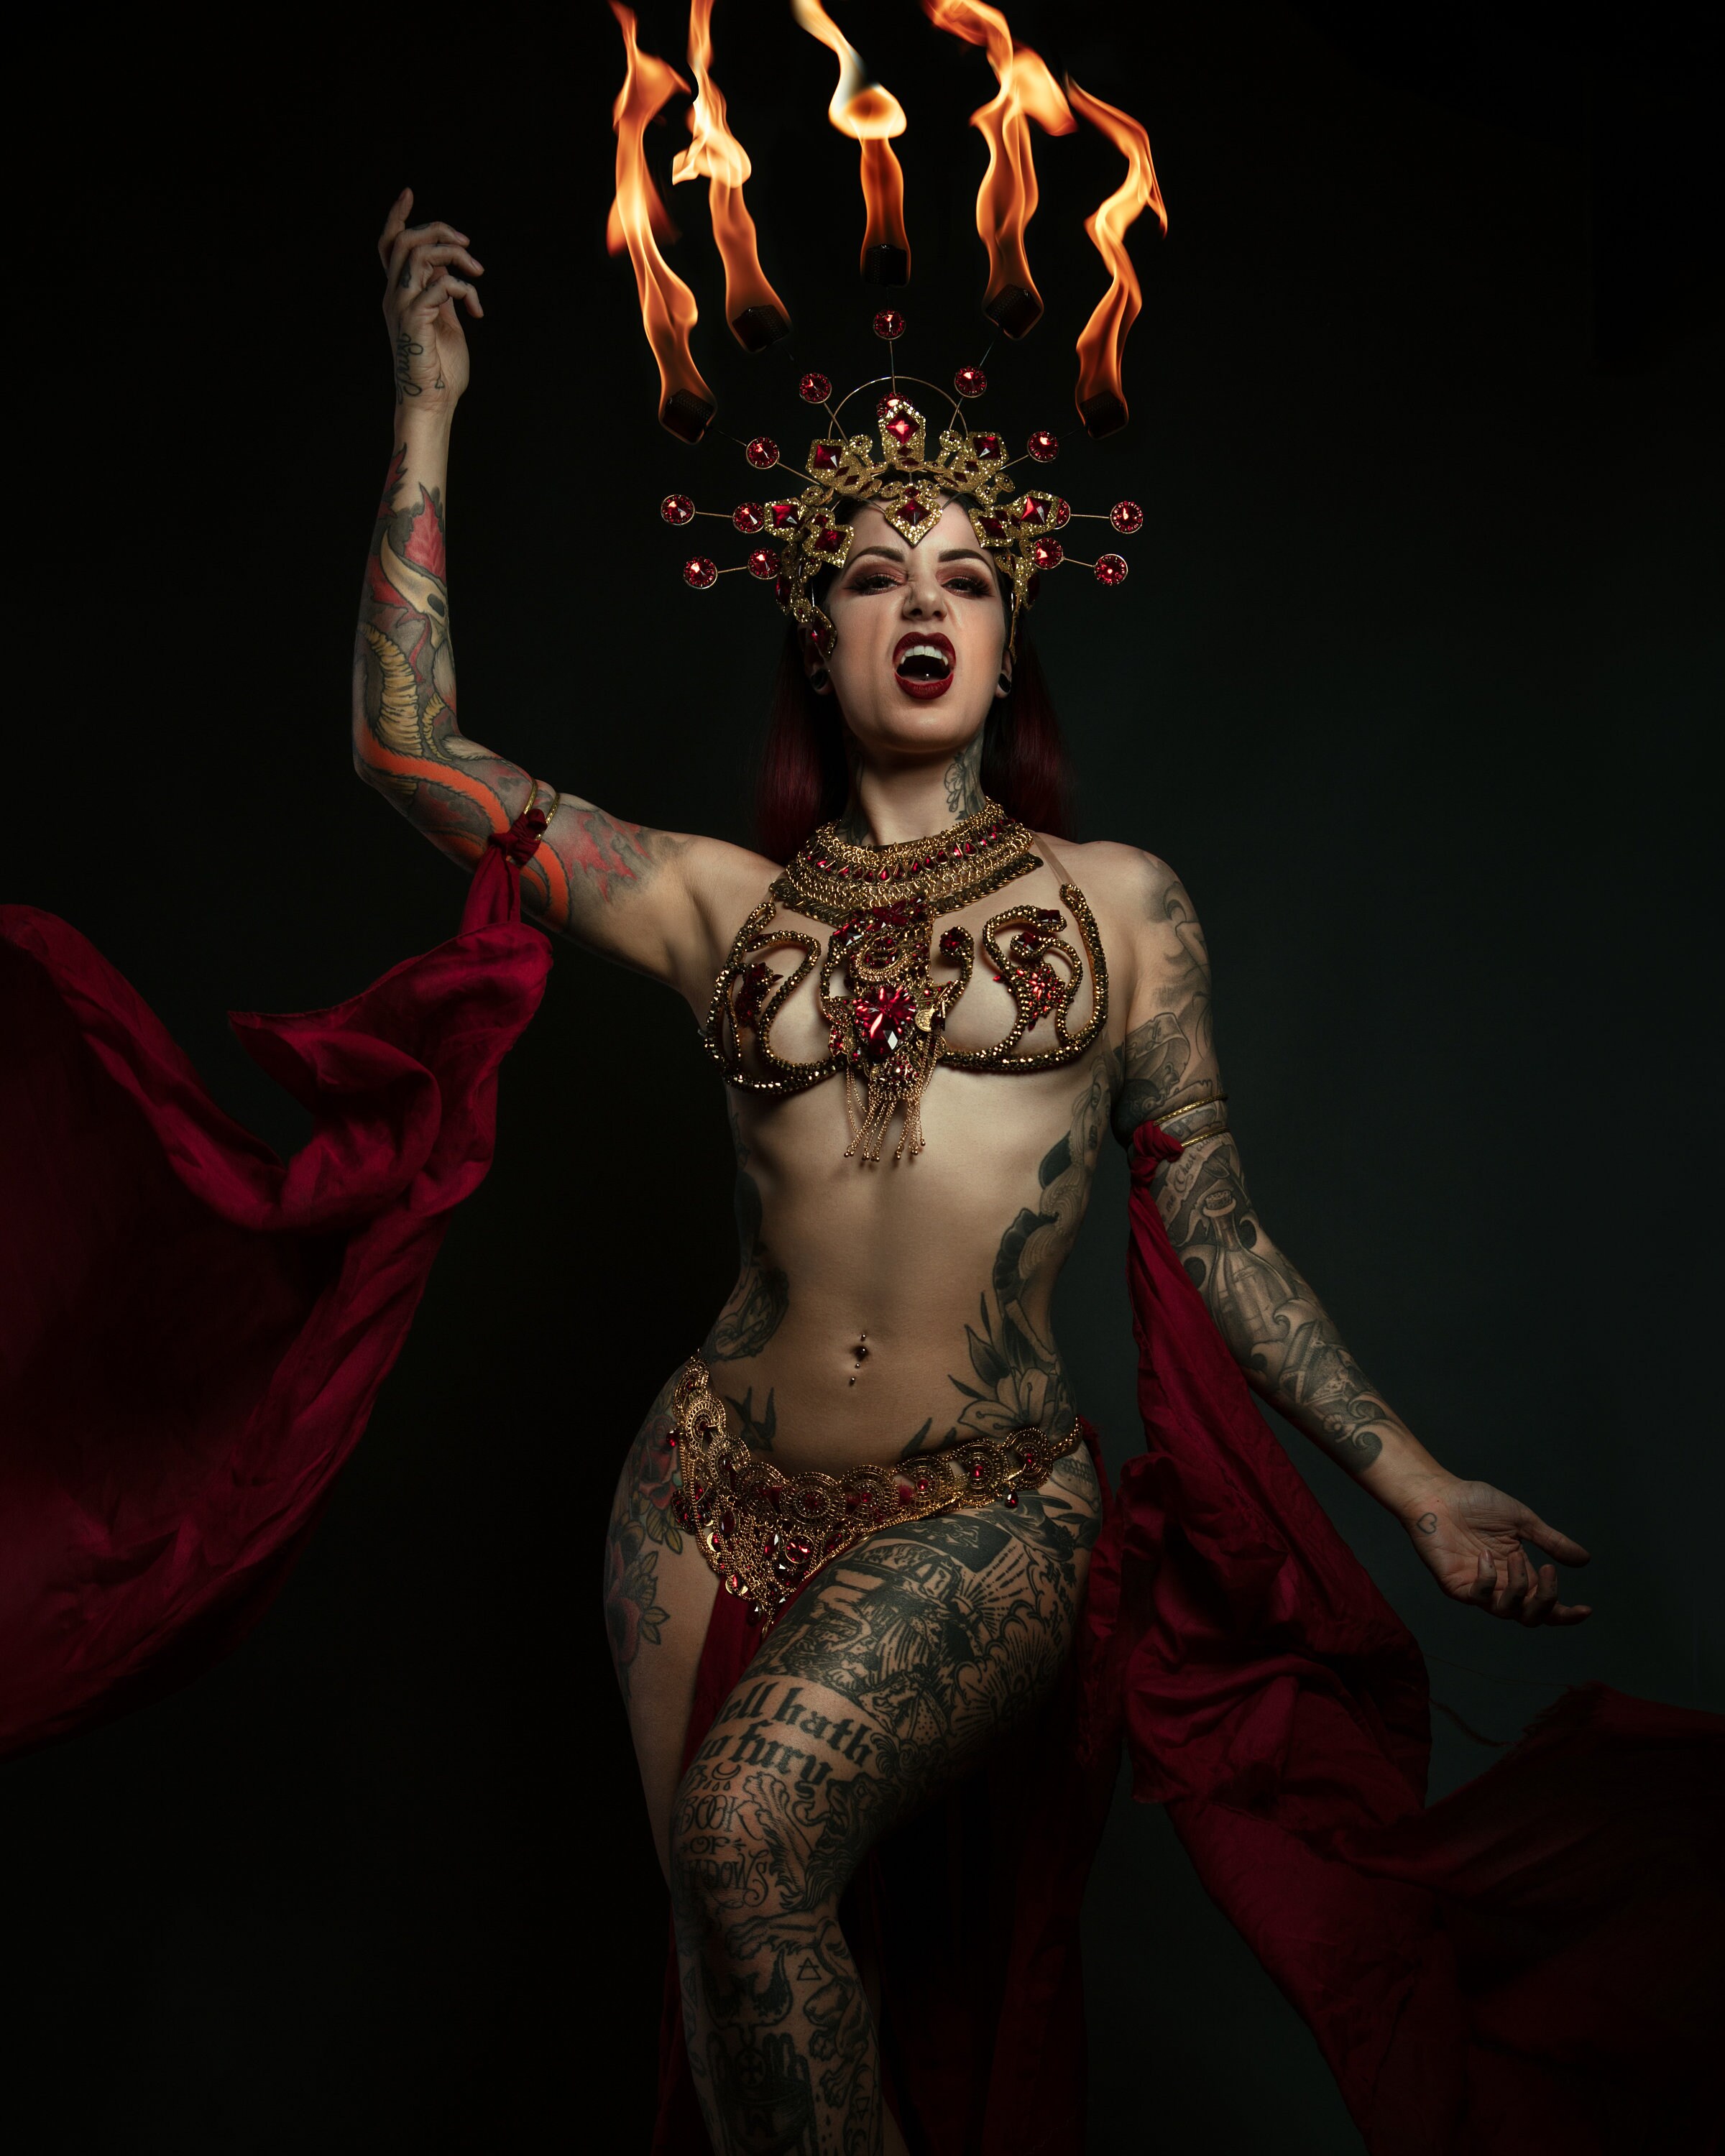 Queen of the damned costume